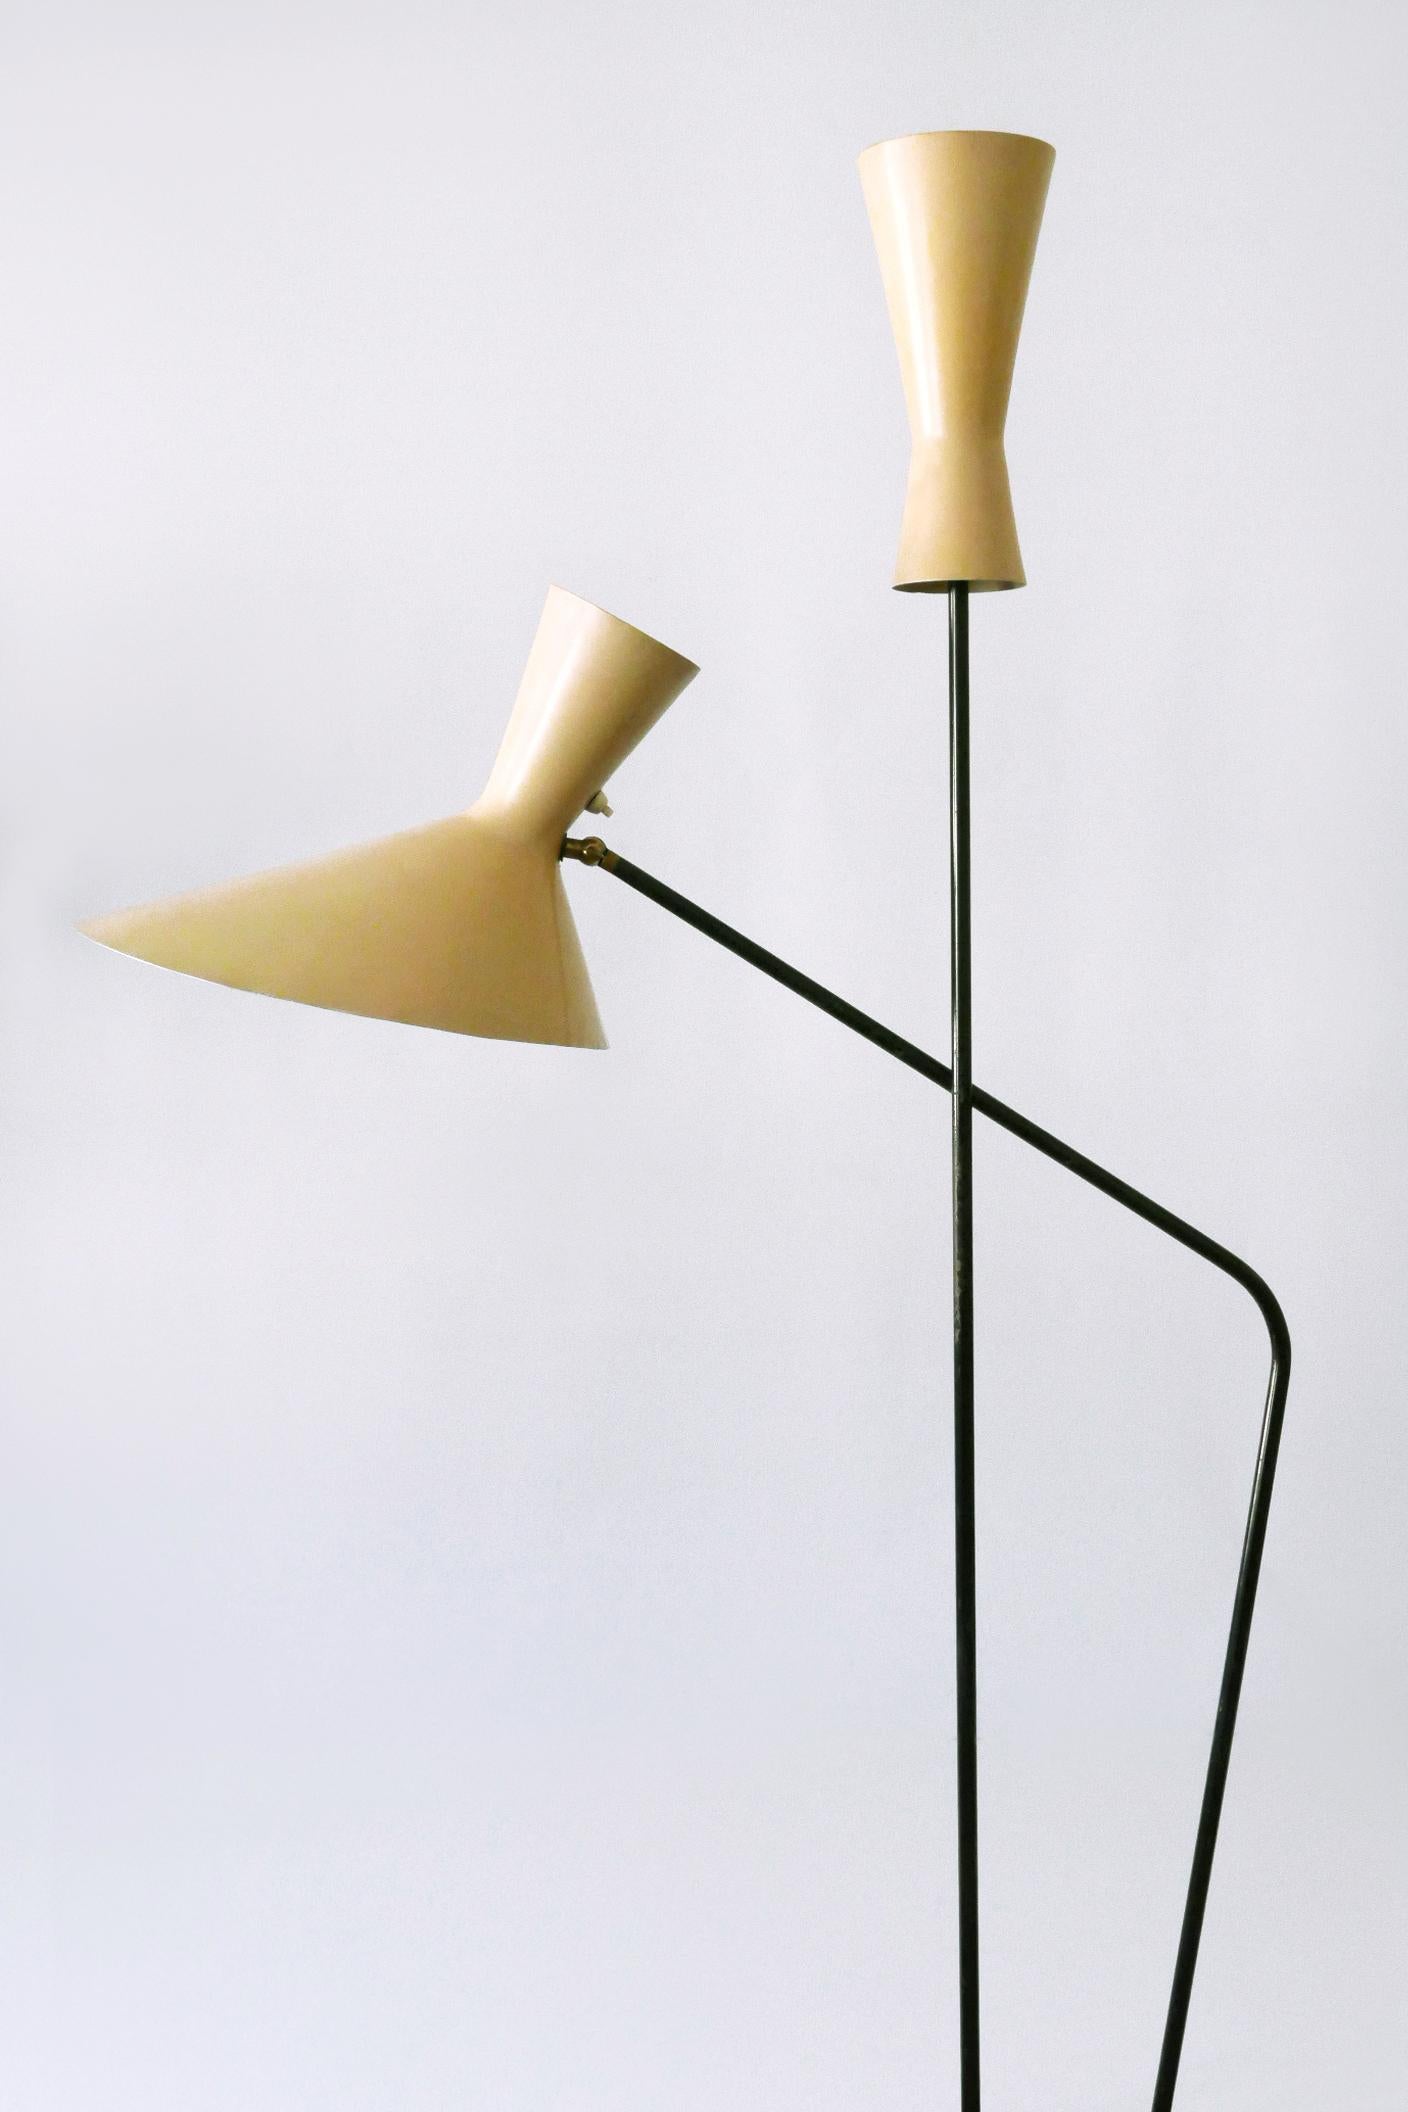 Rare Iconic Mid-Century Modern Floor Lamp by Prof. Carl Moor for BAG Turgi 1950s In Good Condition For Sale In Munich, DE